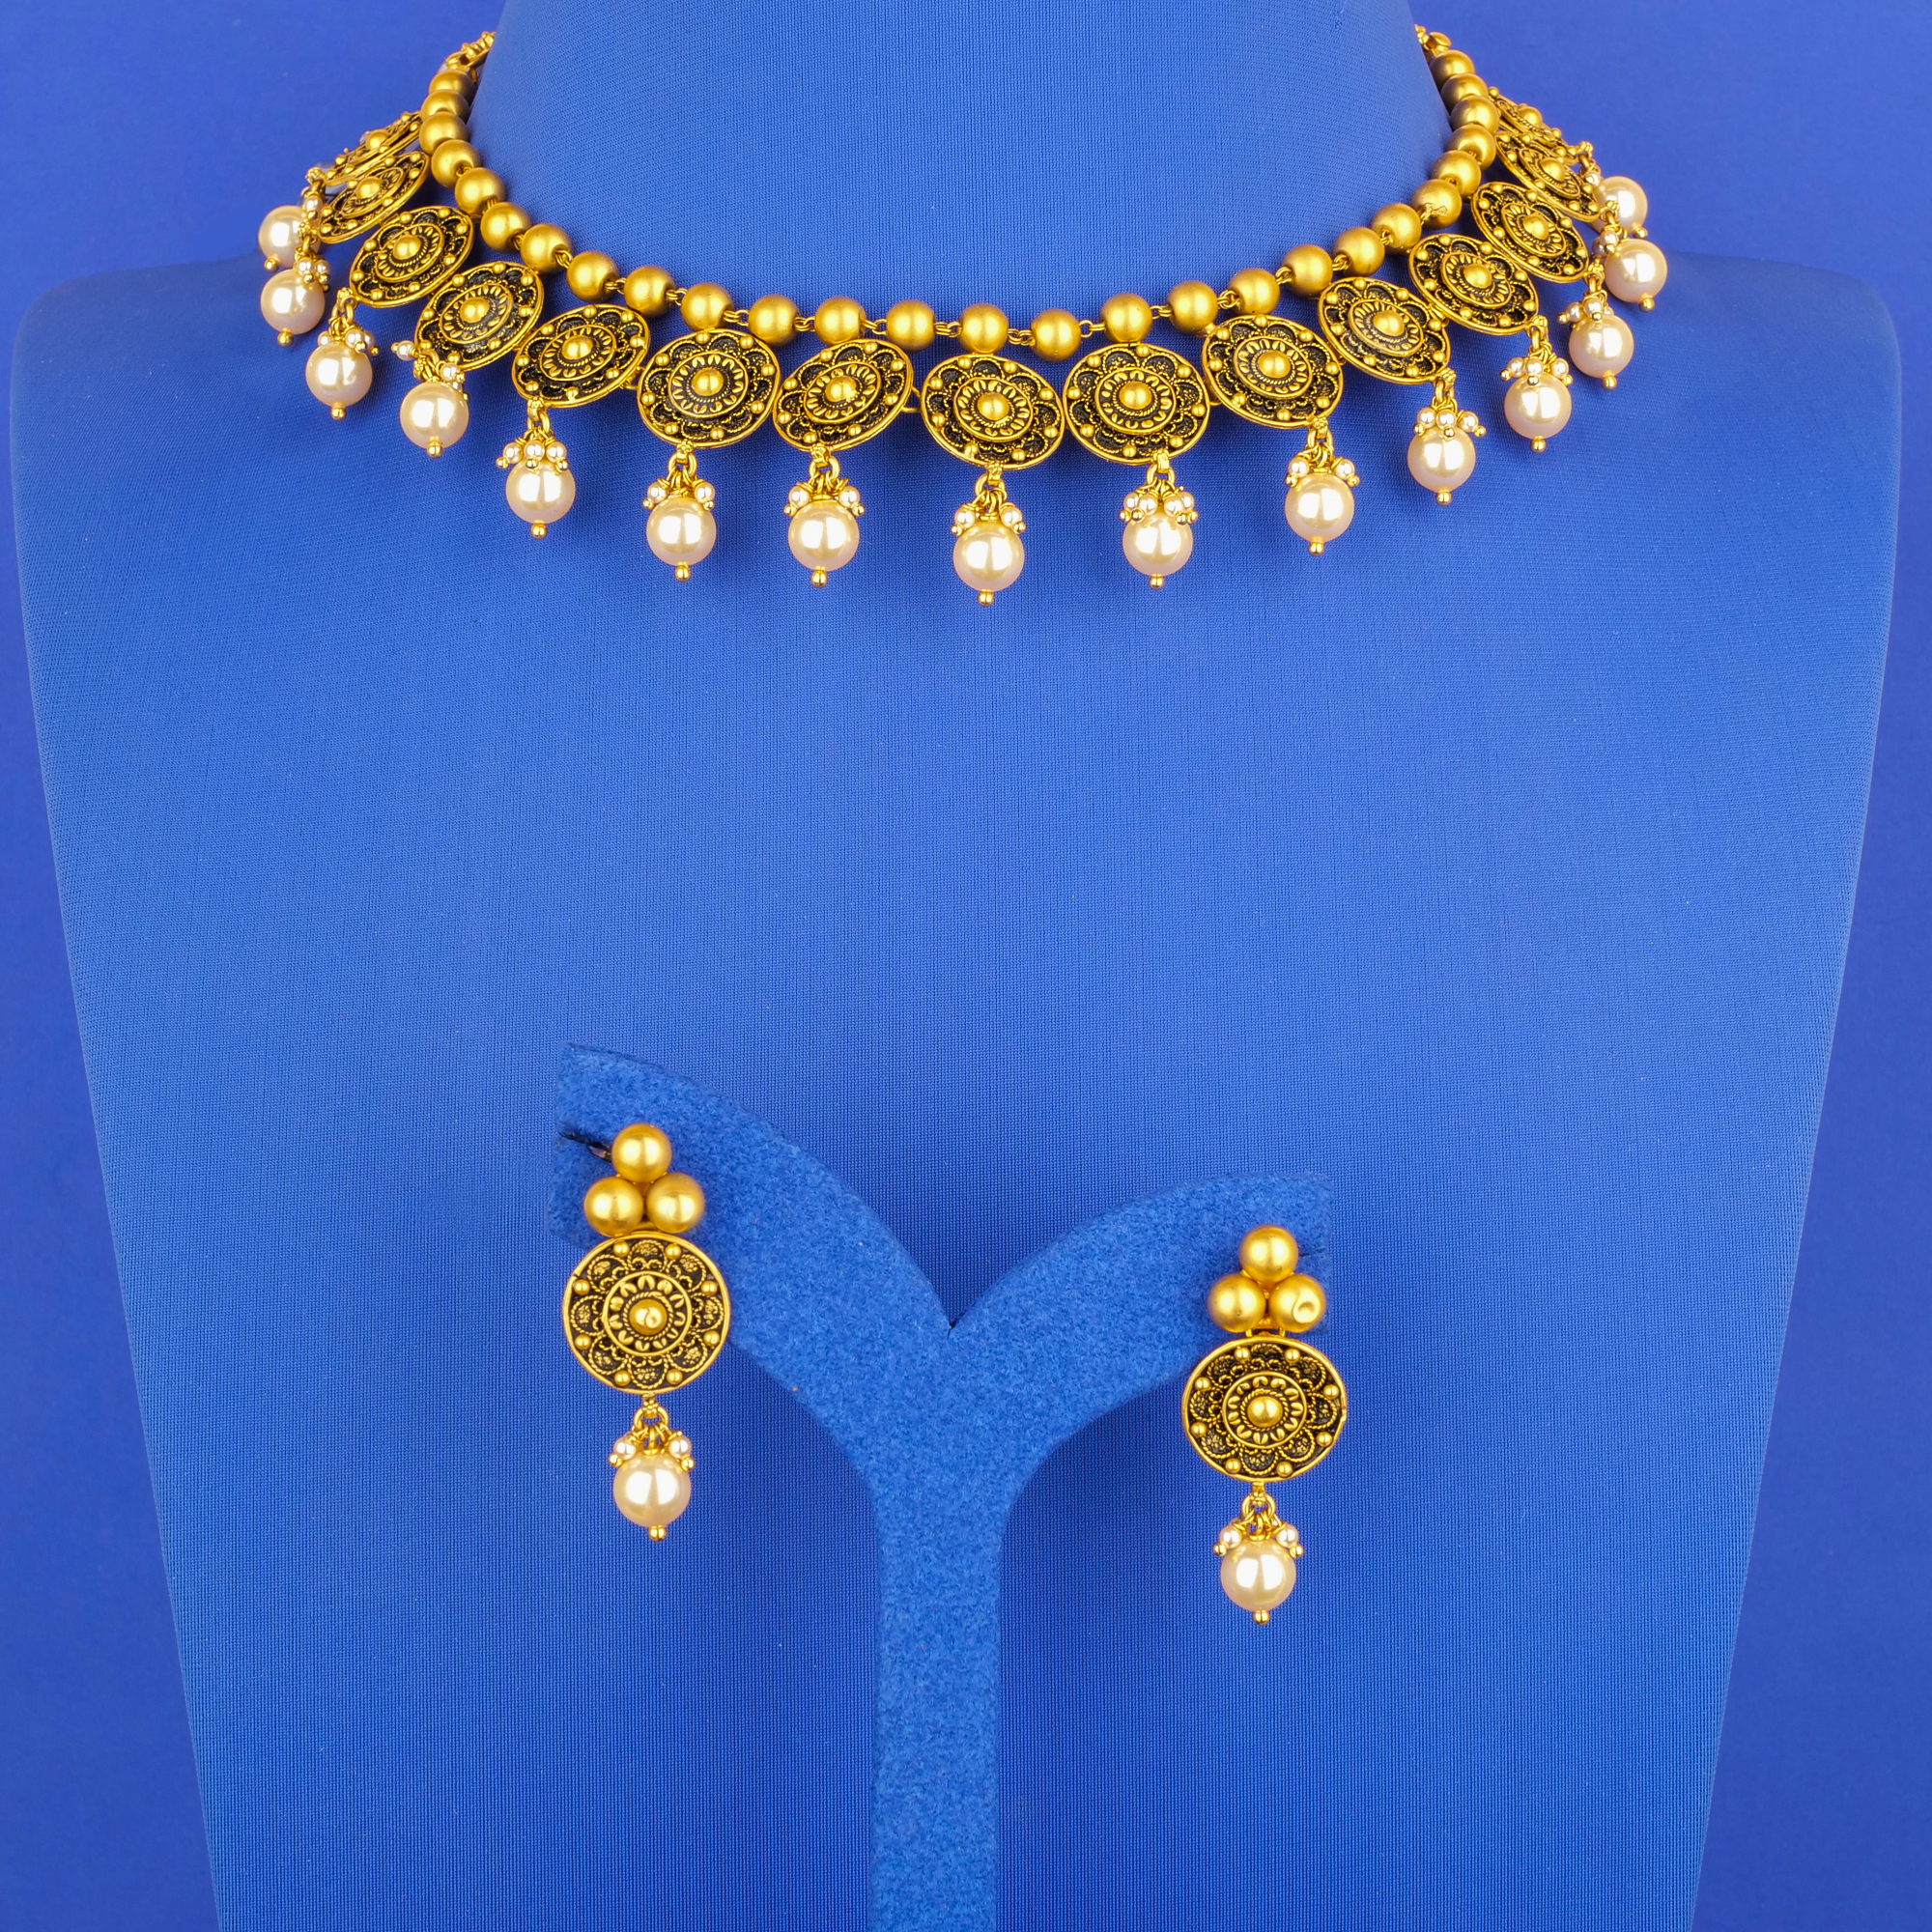 22K 'Antique' Minakari Gold and Pearl Necklace and Earring Set